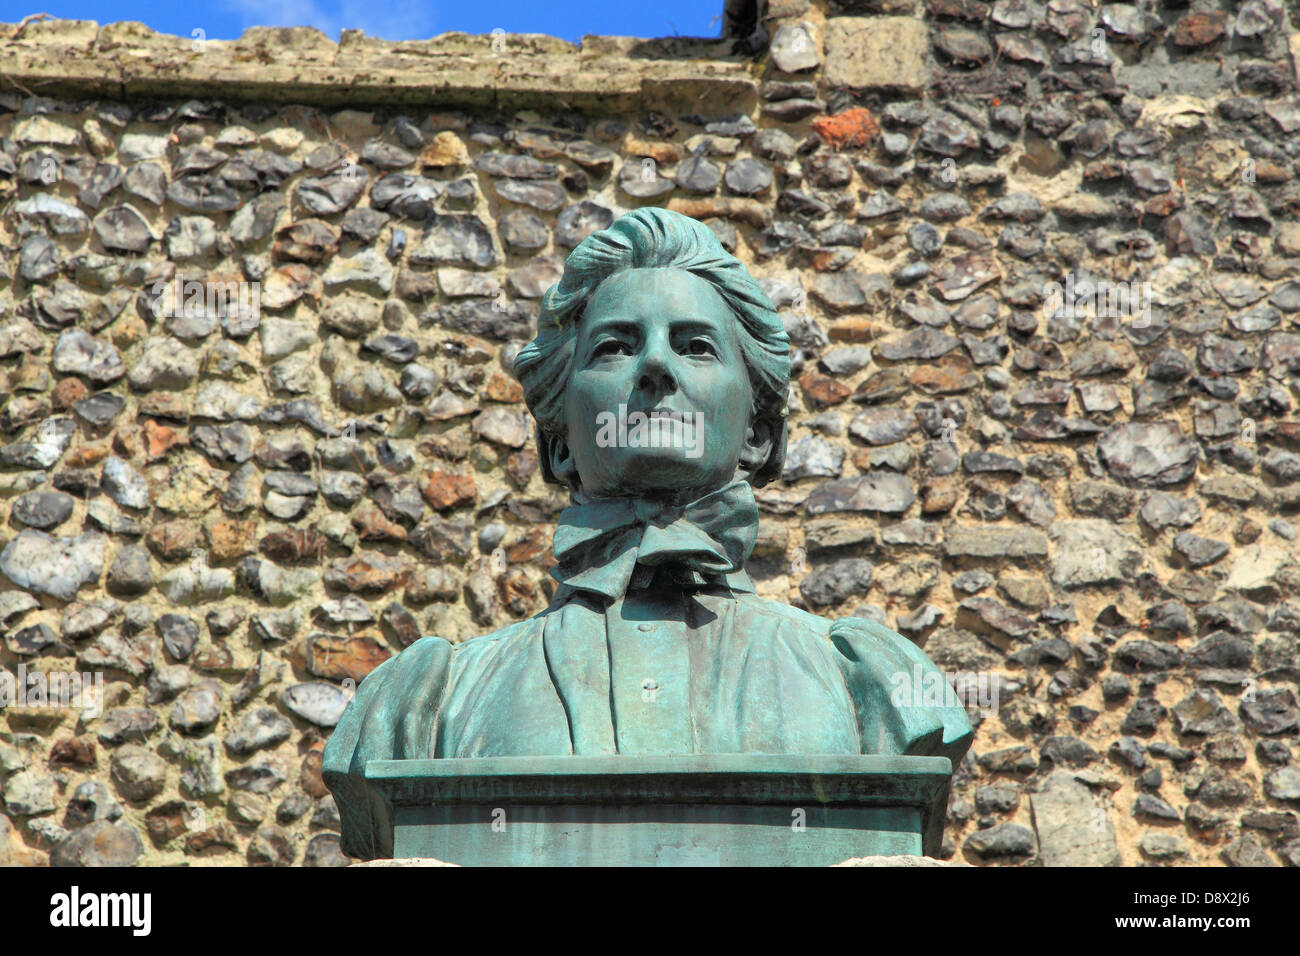 Norwich, monument to Edith Cavell, nurse, patriot and martyr, 1st World War heroine, bronze bust Stock Photo